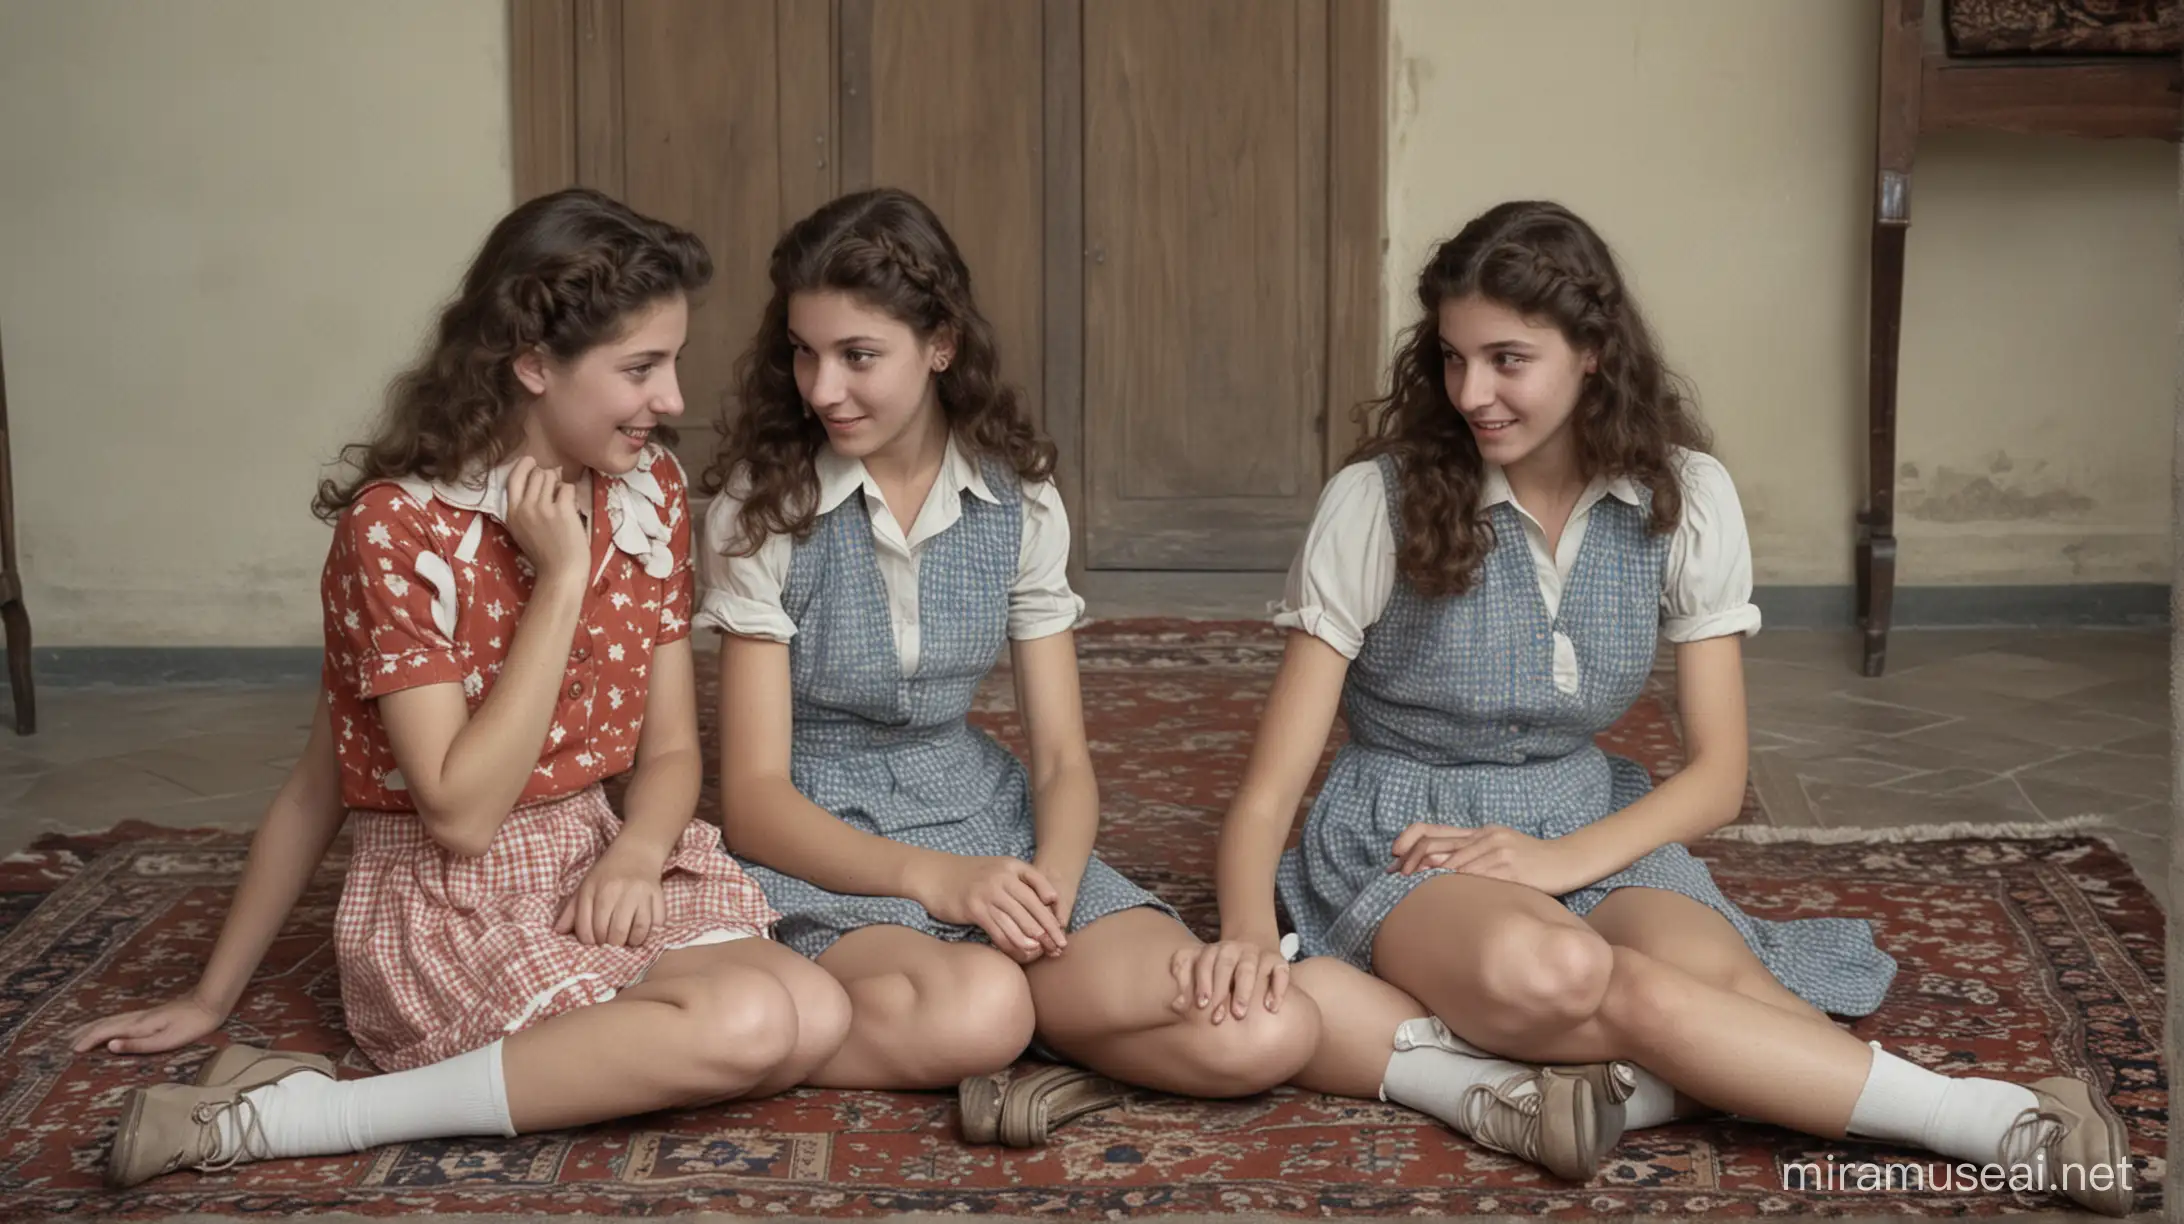 Italian Teenage Twin Sisters Chatting on a Rug in Florence Apartment 1945